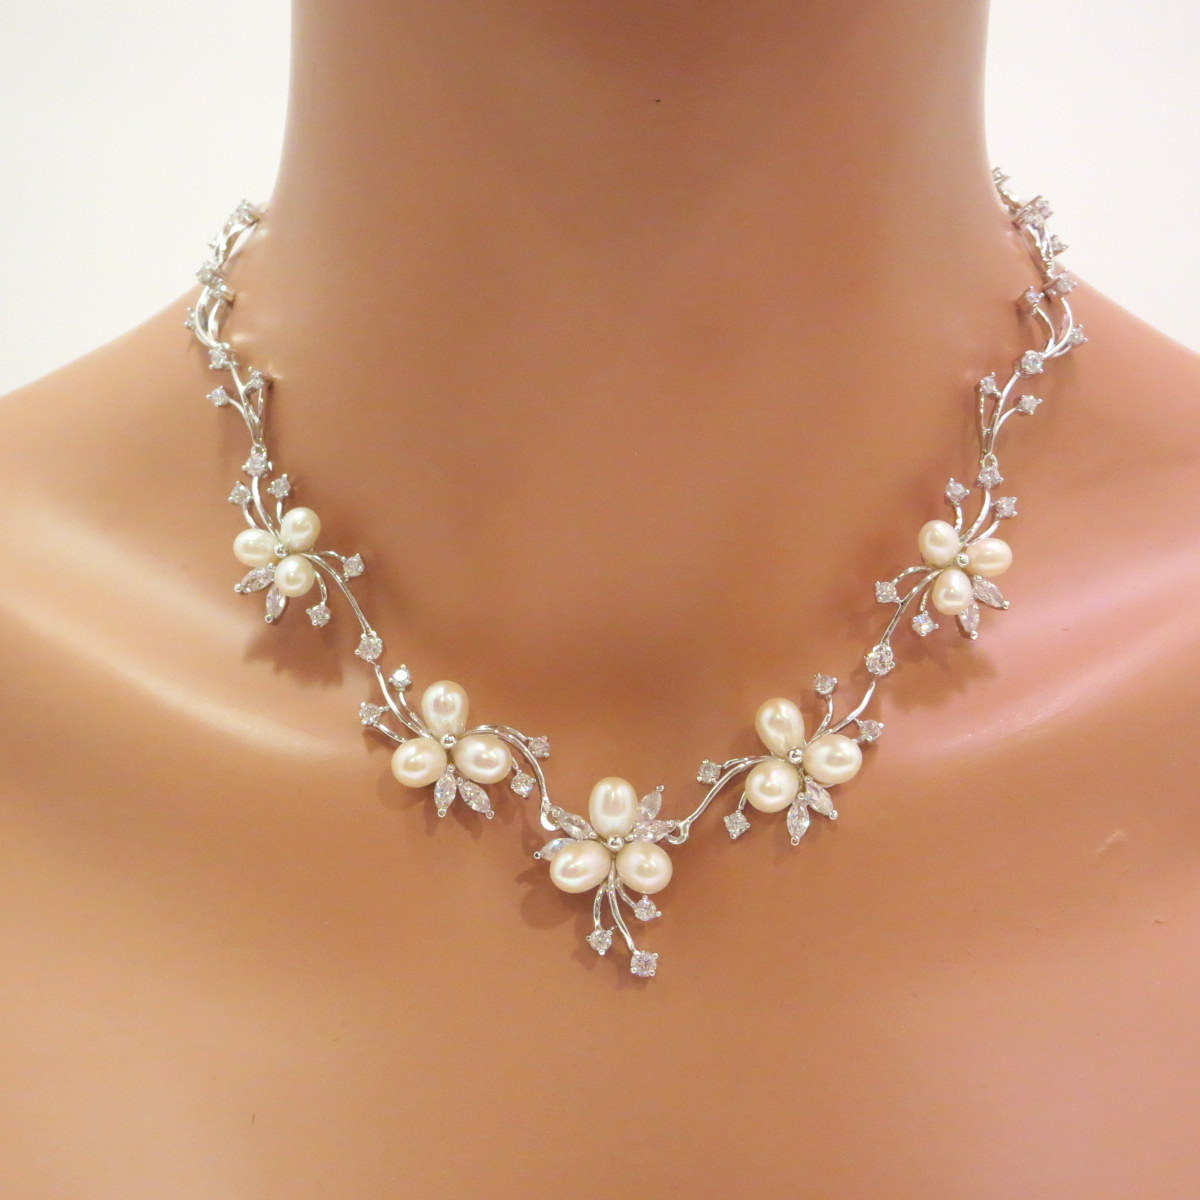 Pearl Bridal Jewelry Sets
 Pearl Bridal necklace set Pearl bridal by TheExquisiteBride